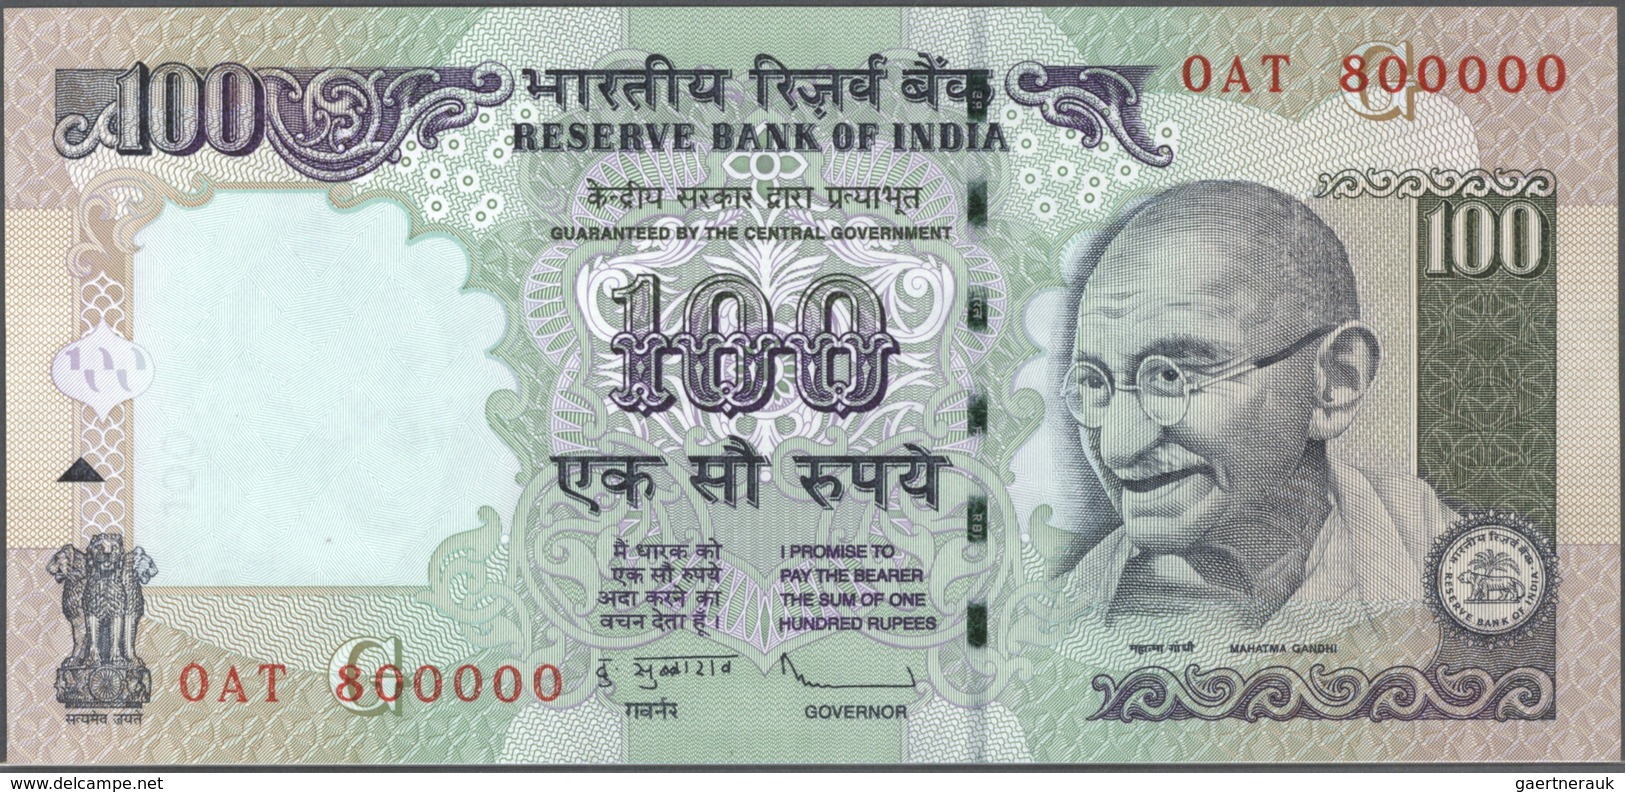 India / Indien: set of 9 notes 100 Rupees 2009 P. 98 all with interesting serial number containing: